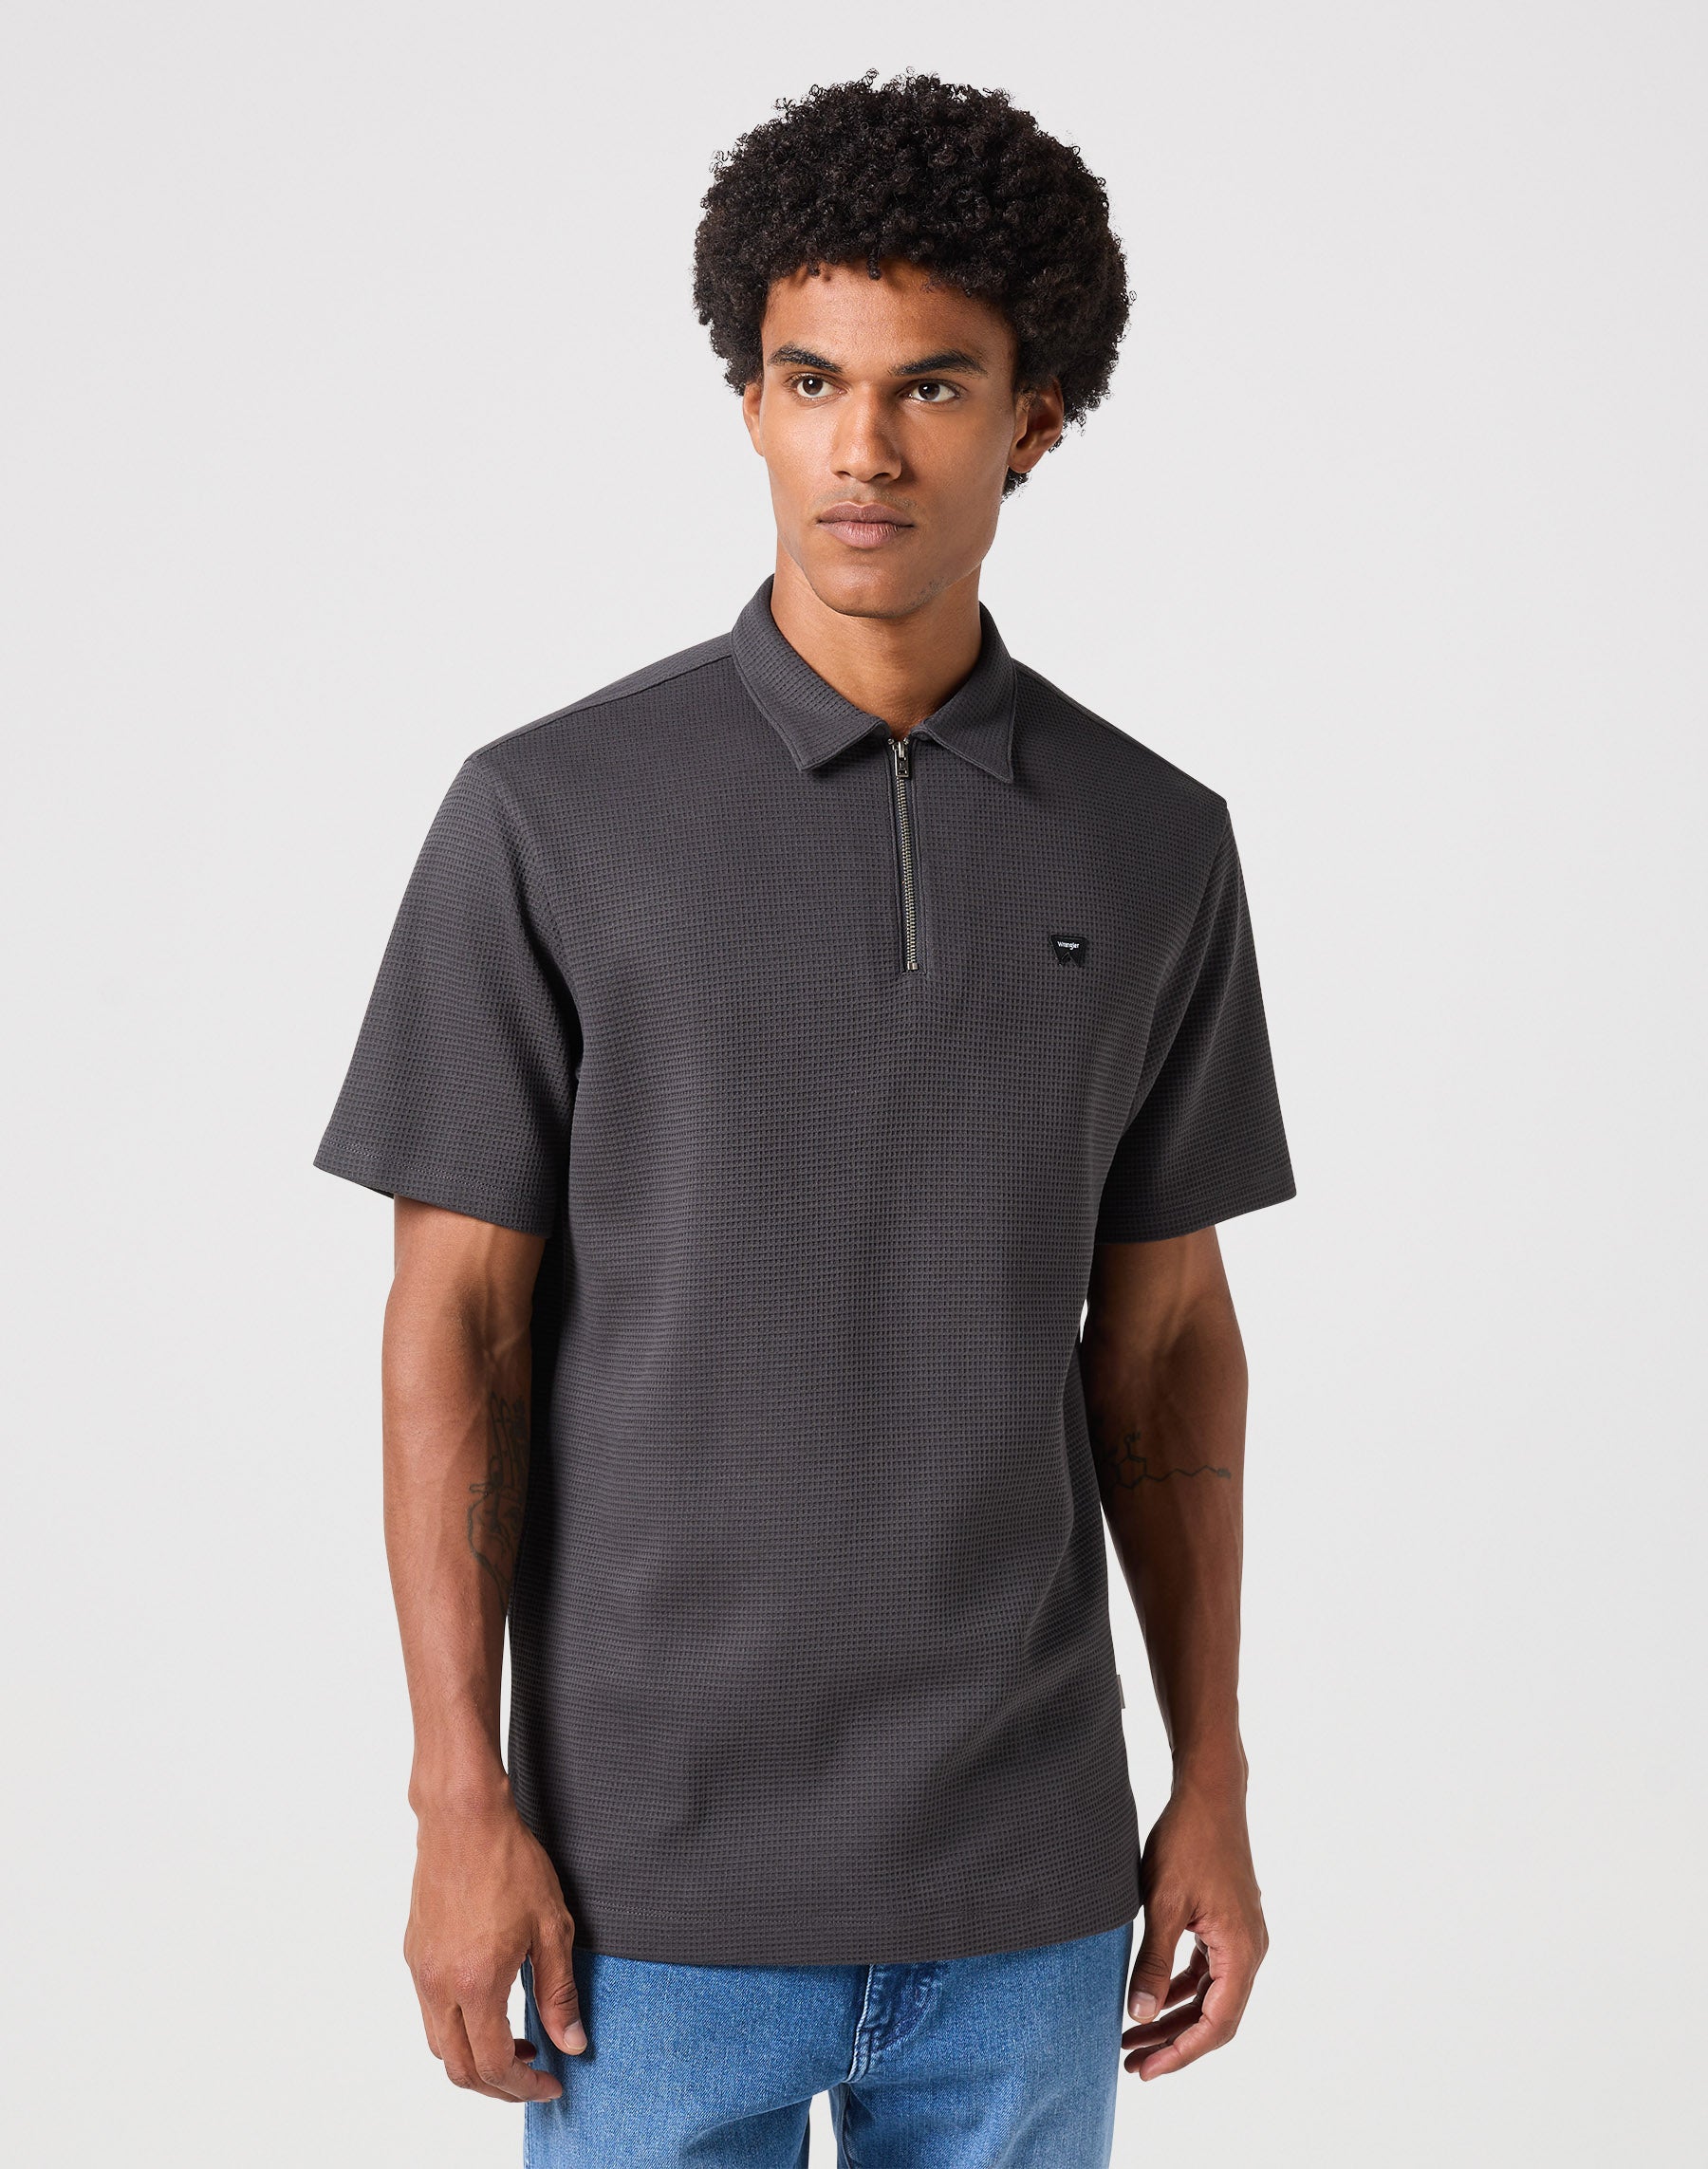 Rugby Polo Shirt in Faded Black Polos Wrangler   